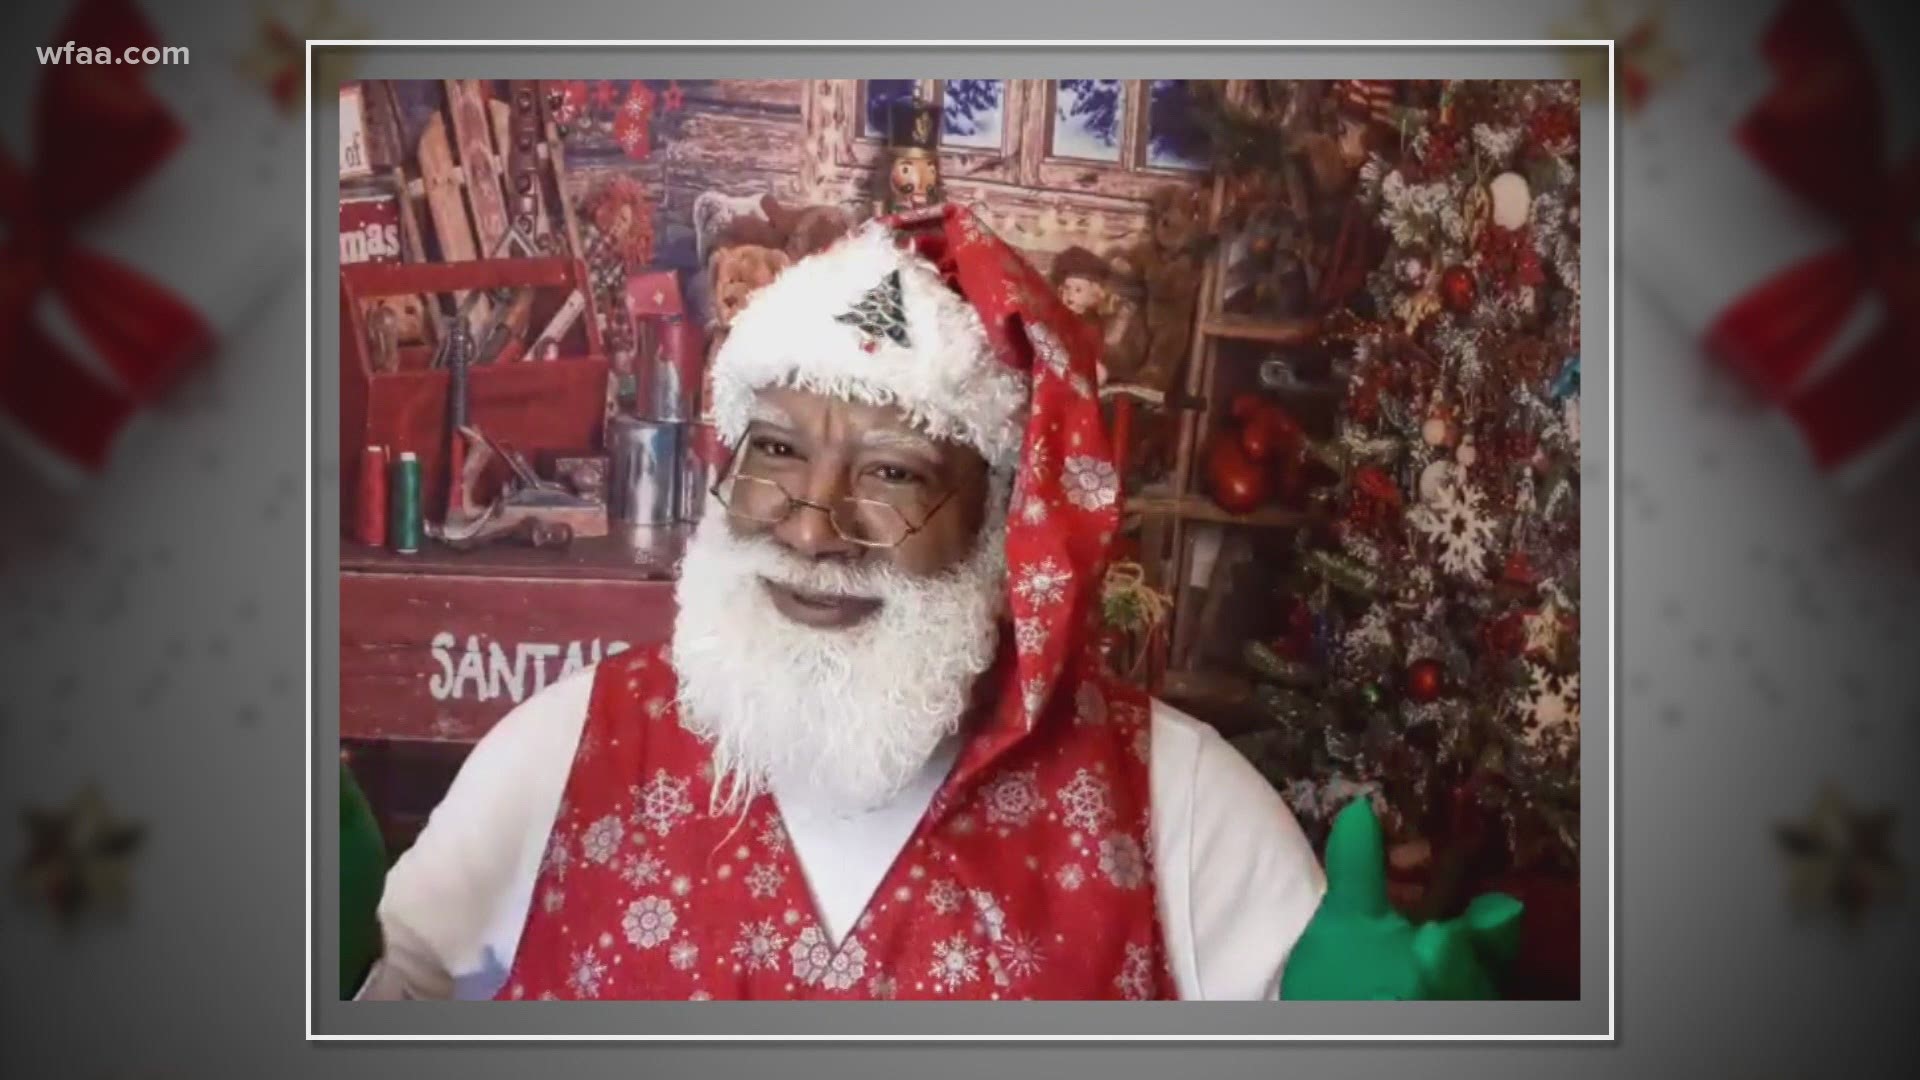 Santa Larry is a familiar face in Dallas. He says the coronavirus is changing things this year.